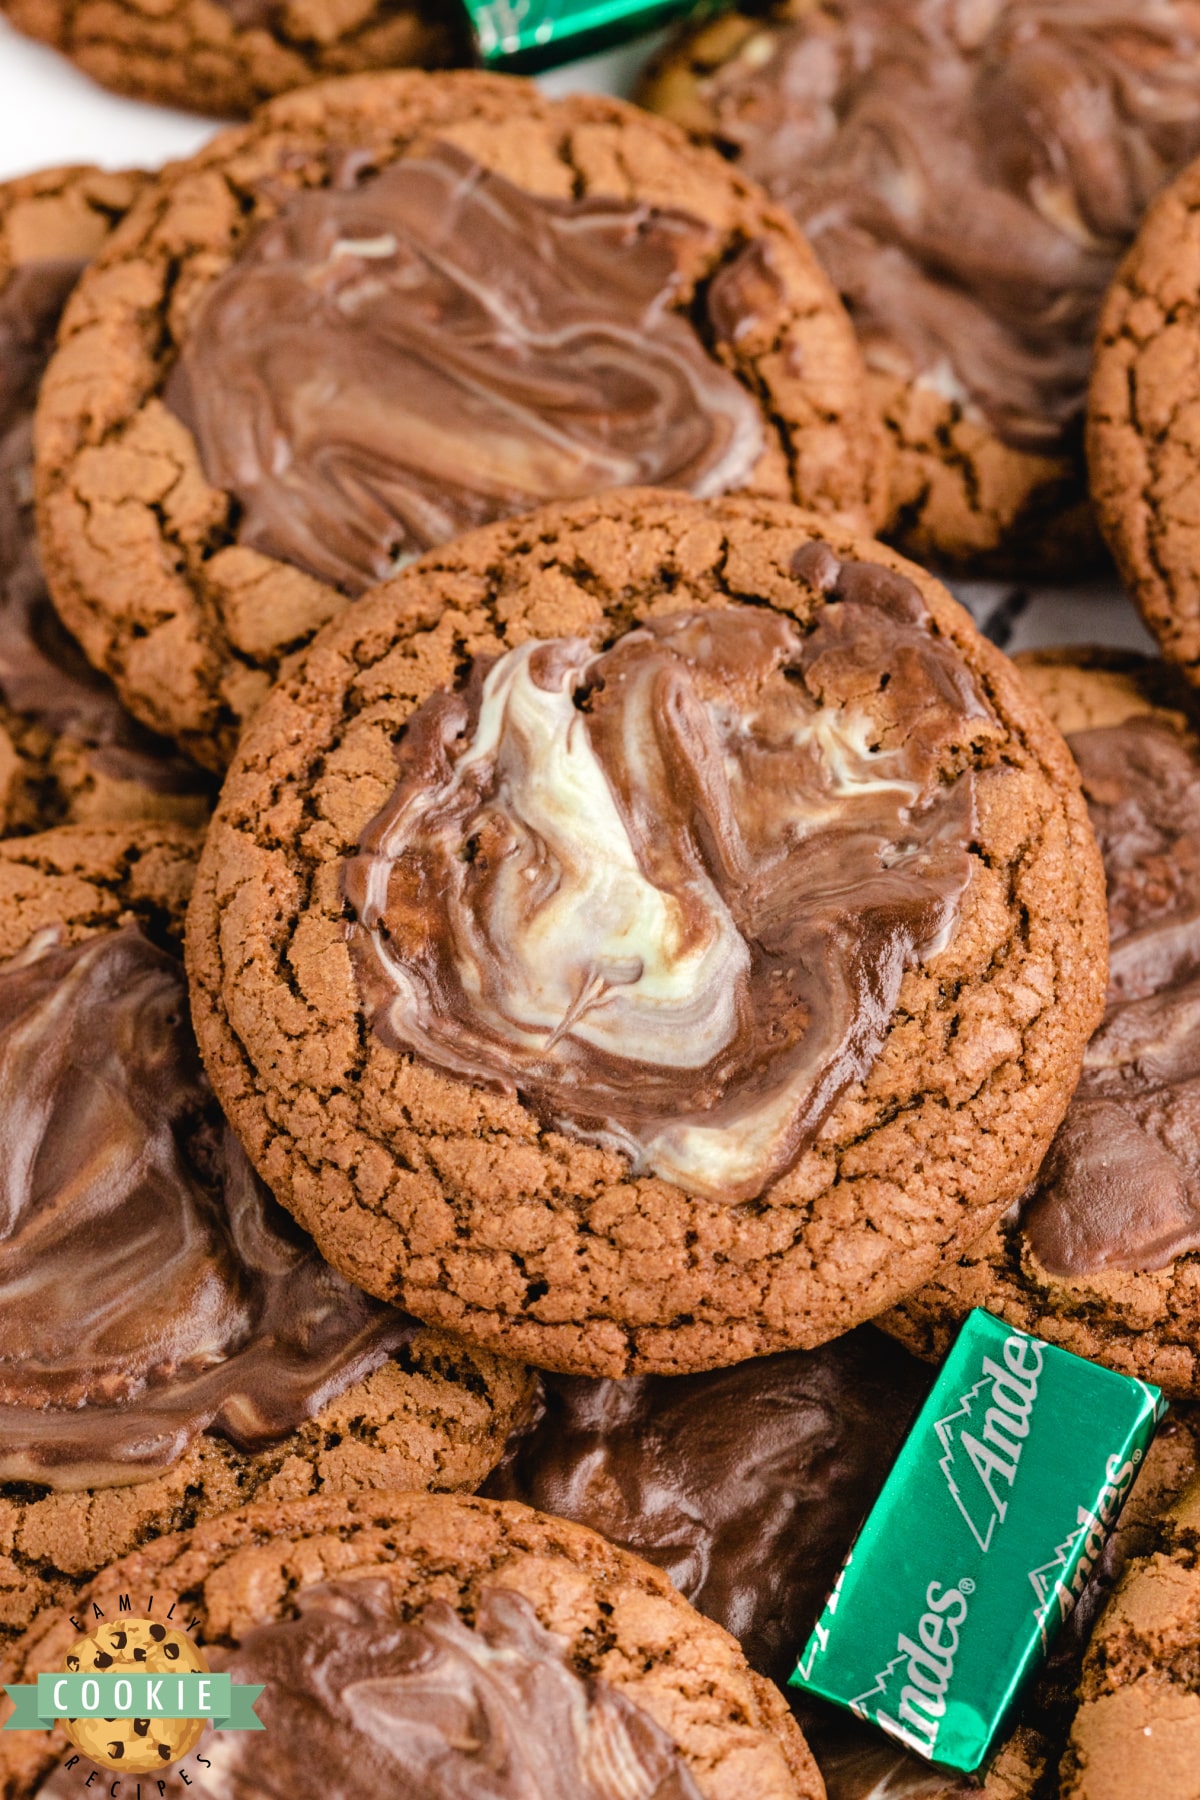 Andes Mint Chocolate Cookies are chewy, chocolate and frosted with a melted Andes mint! These cookies are the perfect combination of chocolate and mint.